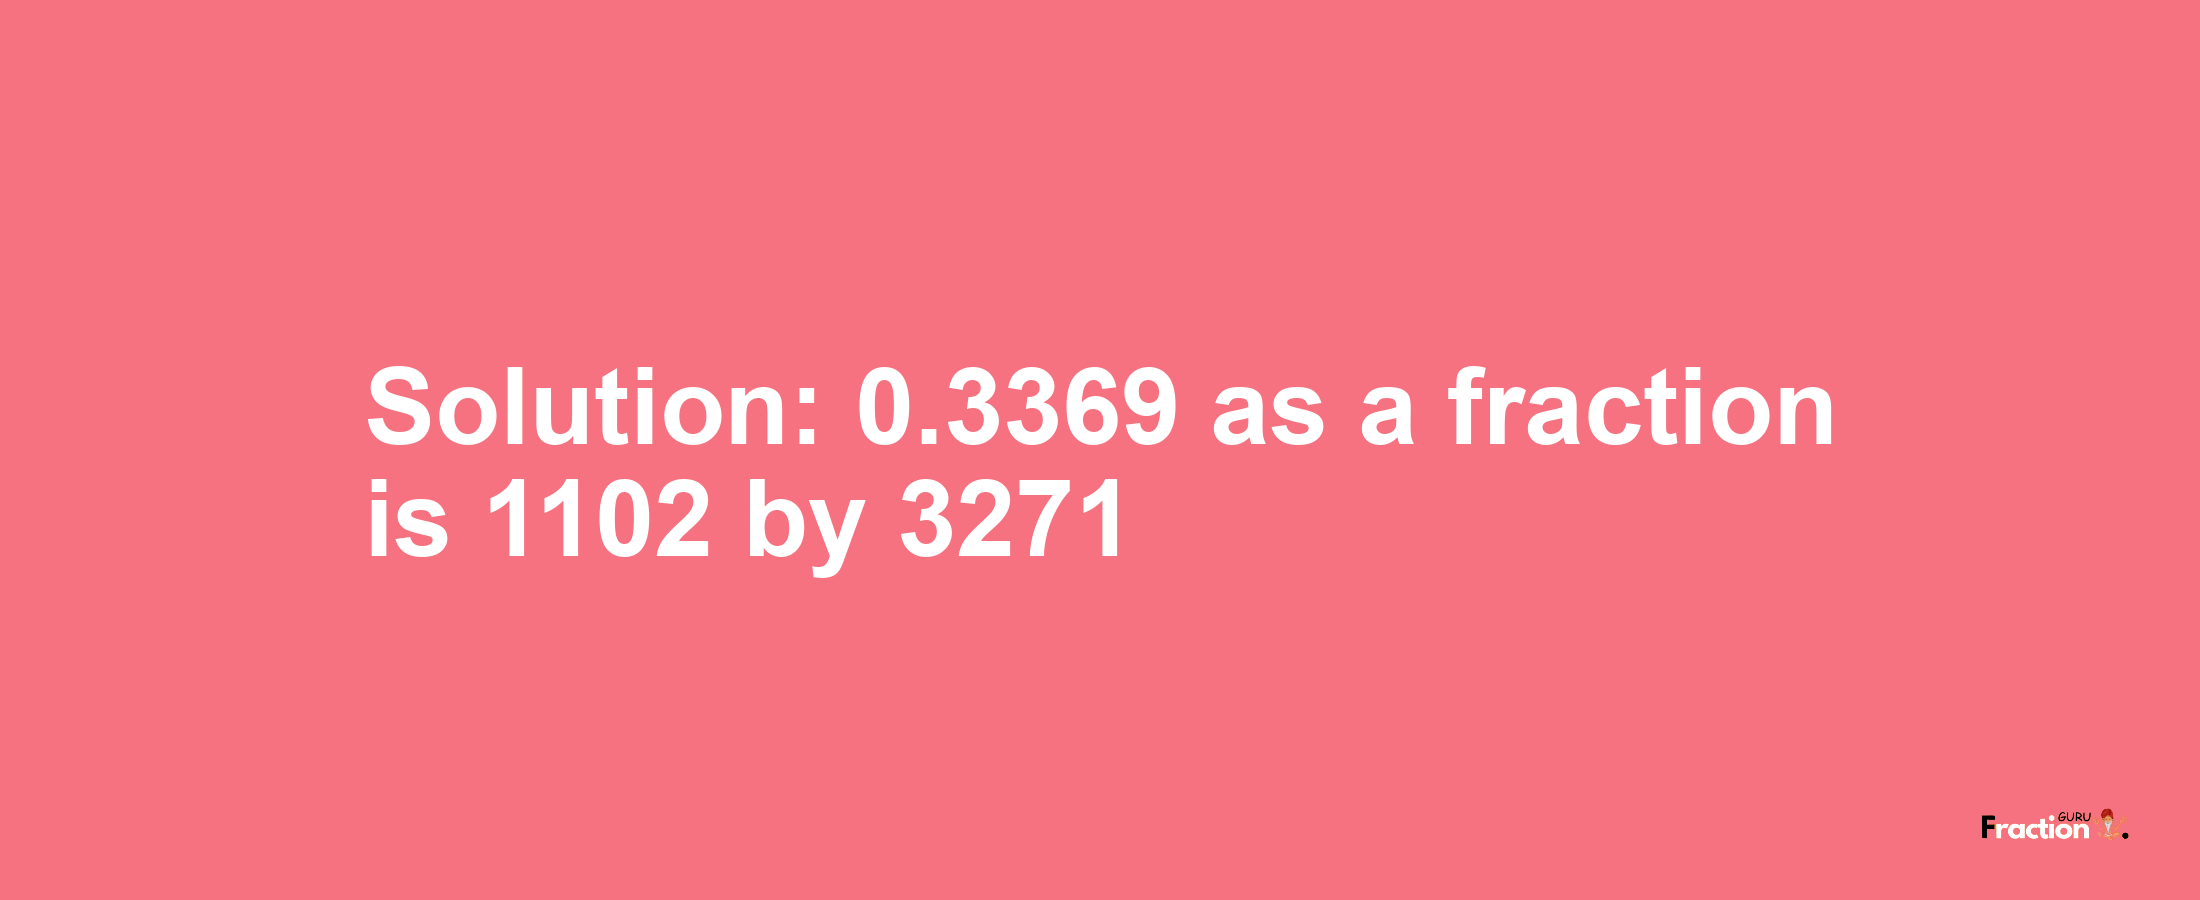 Solution:0.3369 as a fraction is 1102/3271